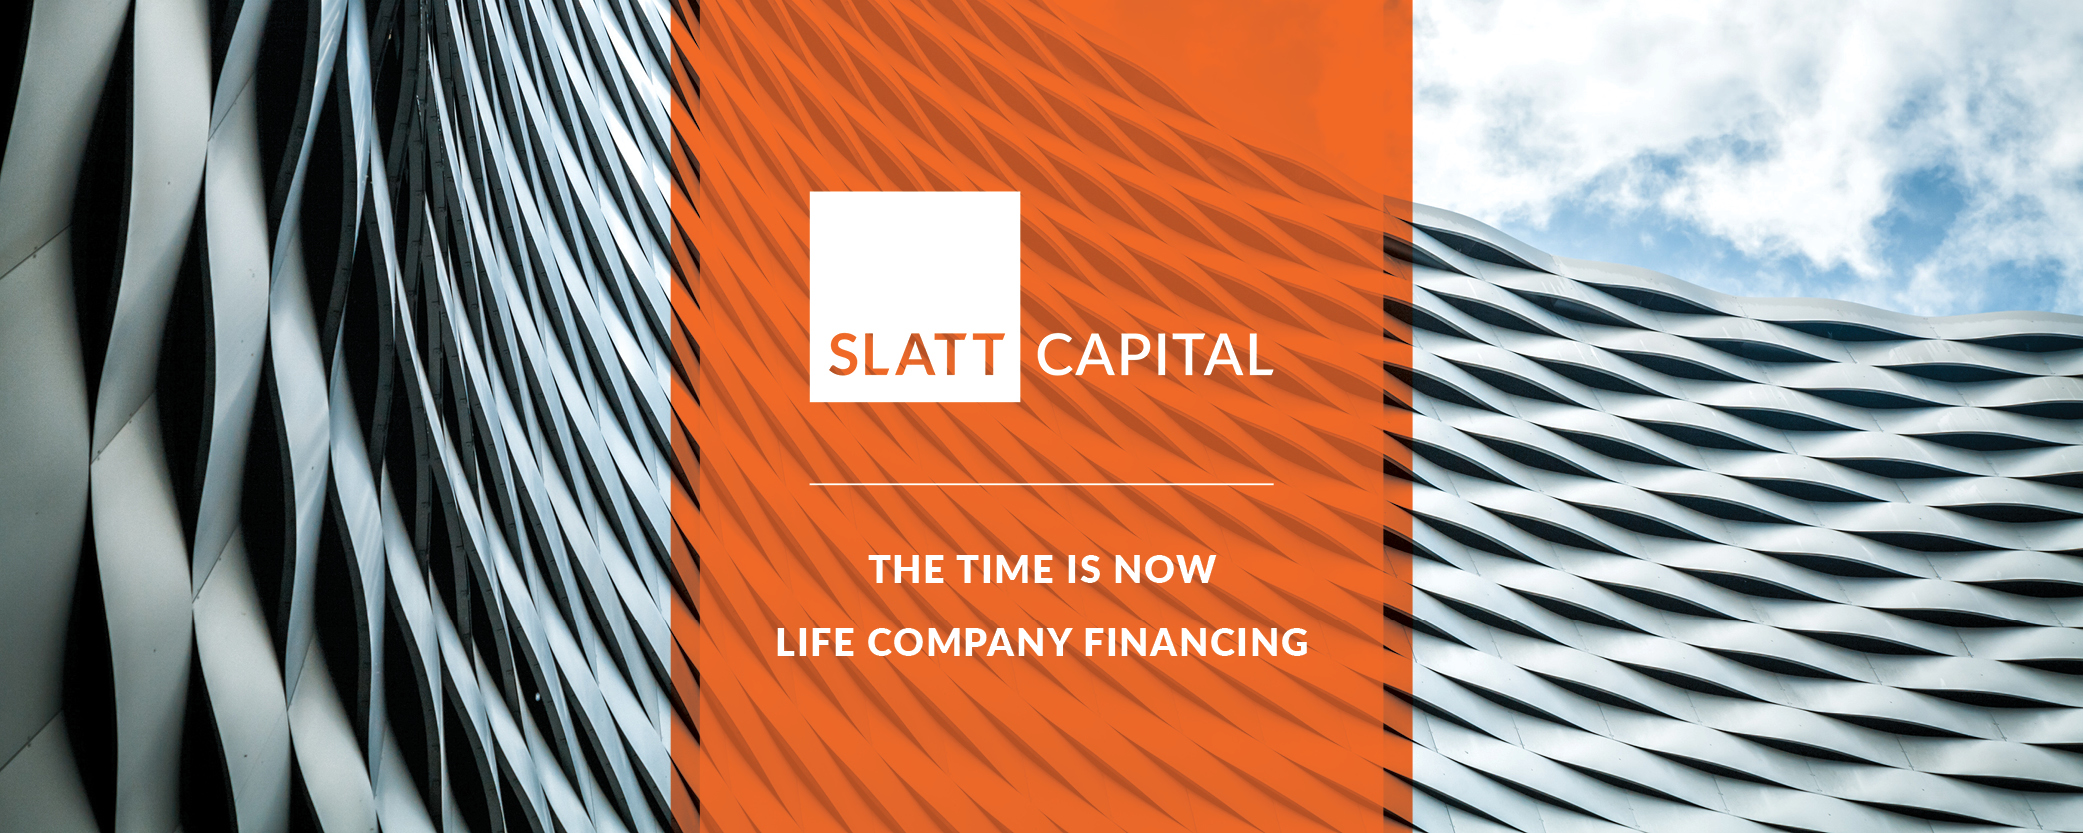 The time is now – life company financing